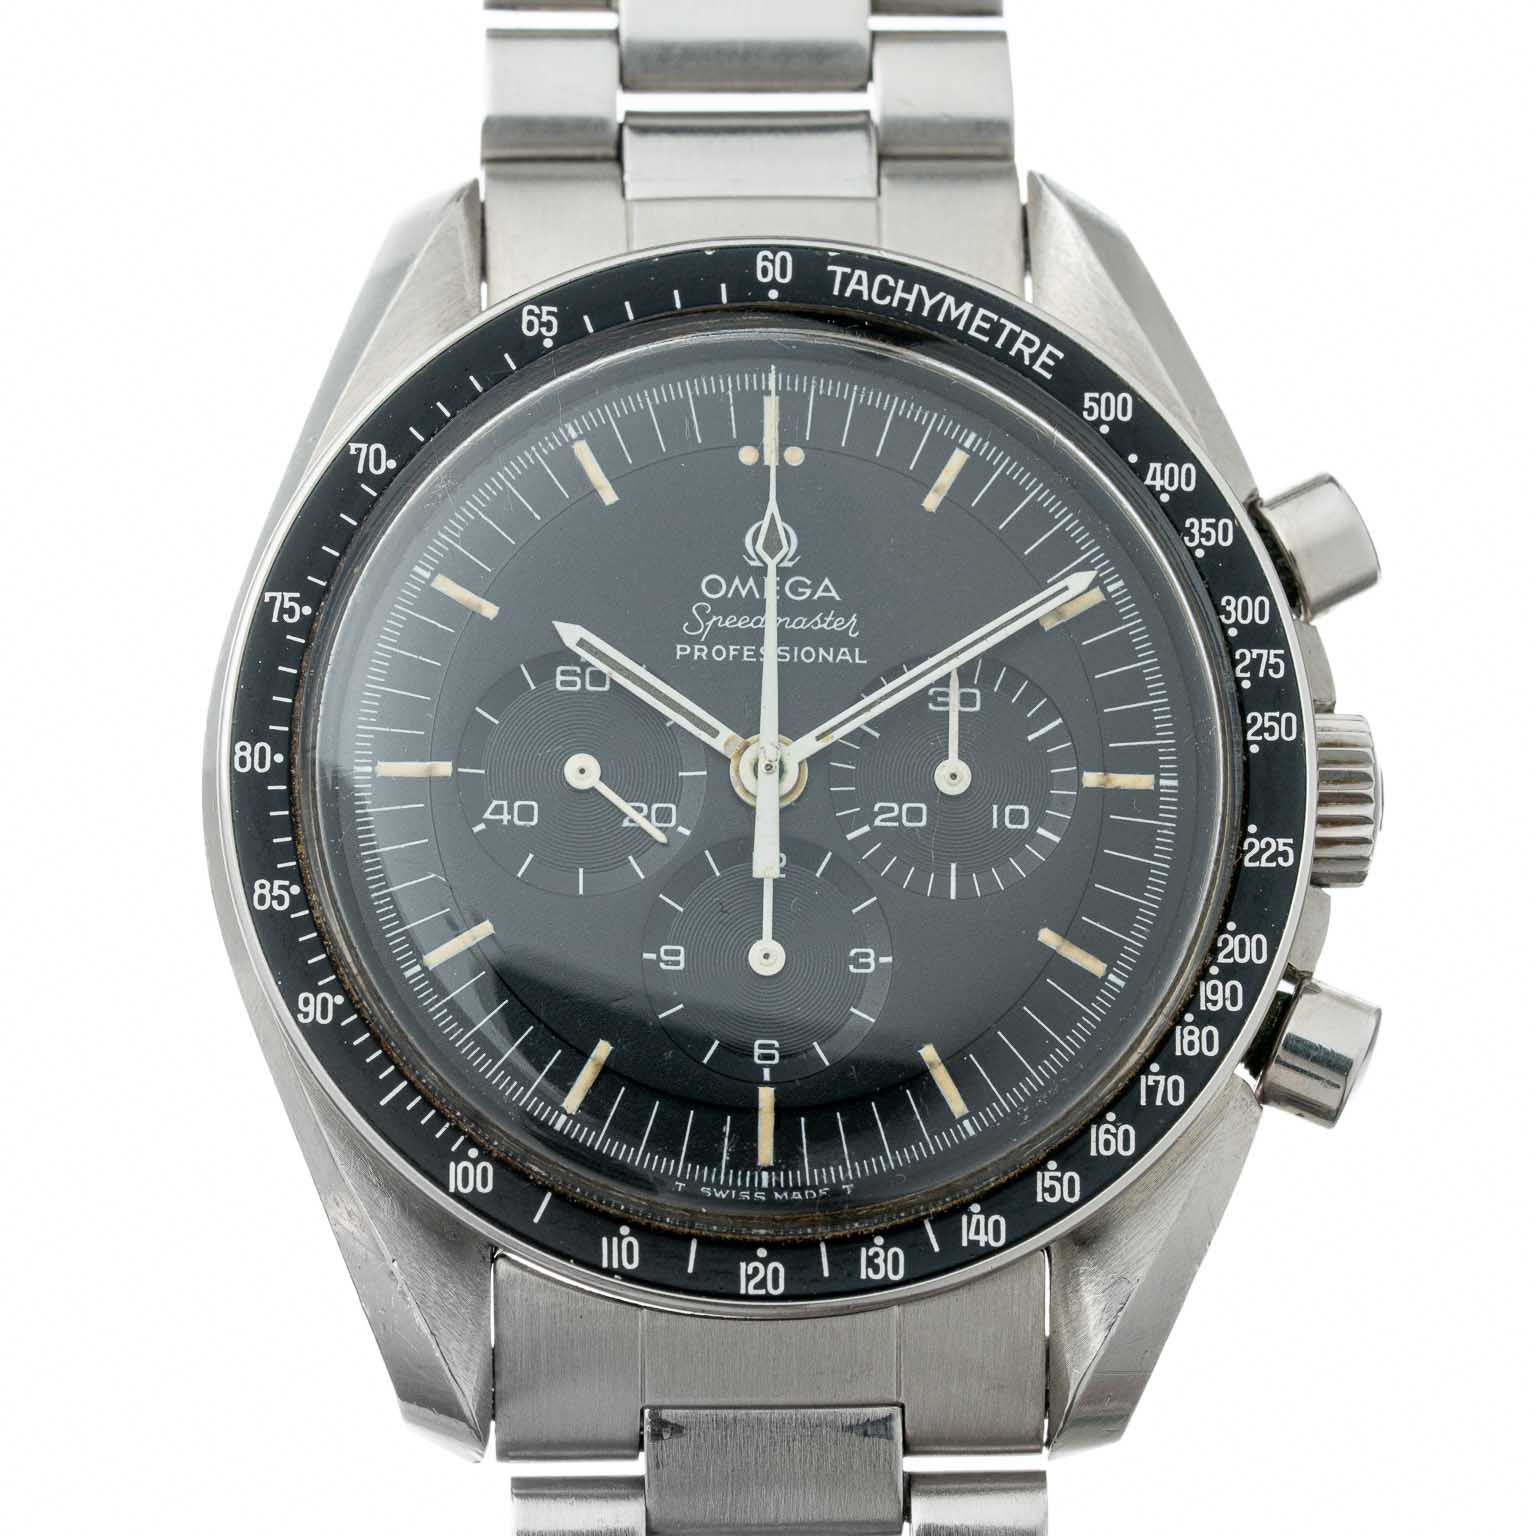 Vintage Omega Speedmaster Professional 'Straight writing' ref. 145.022 from 1971 watch front